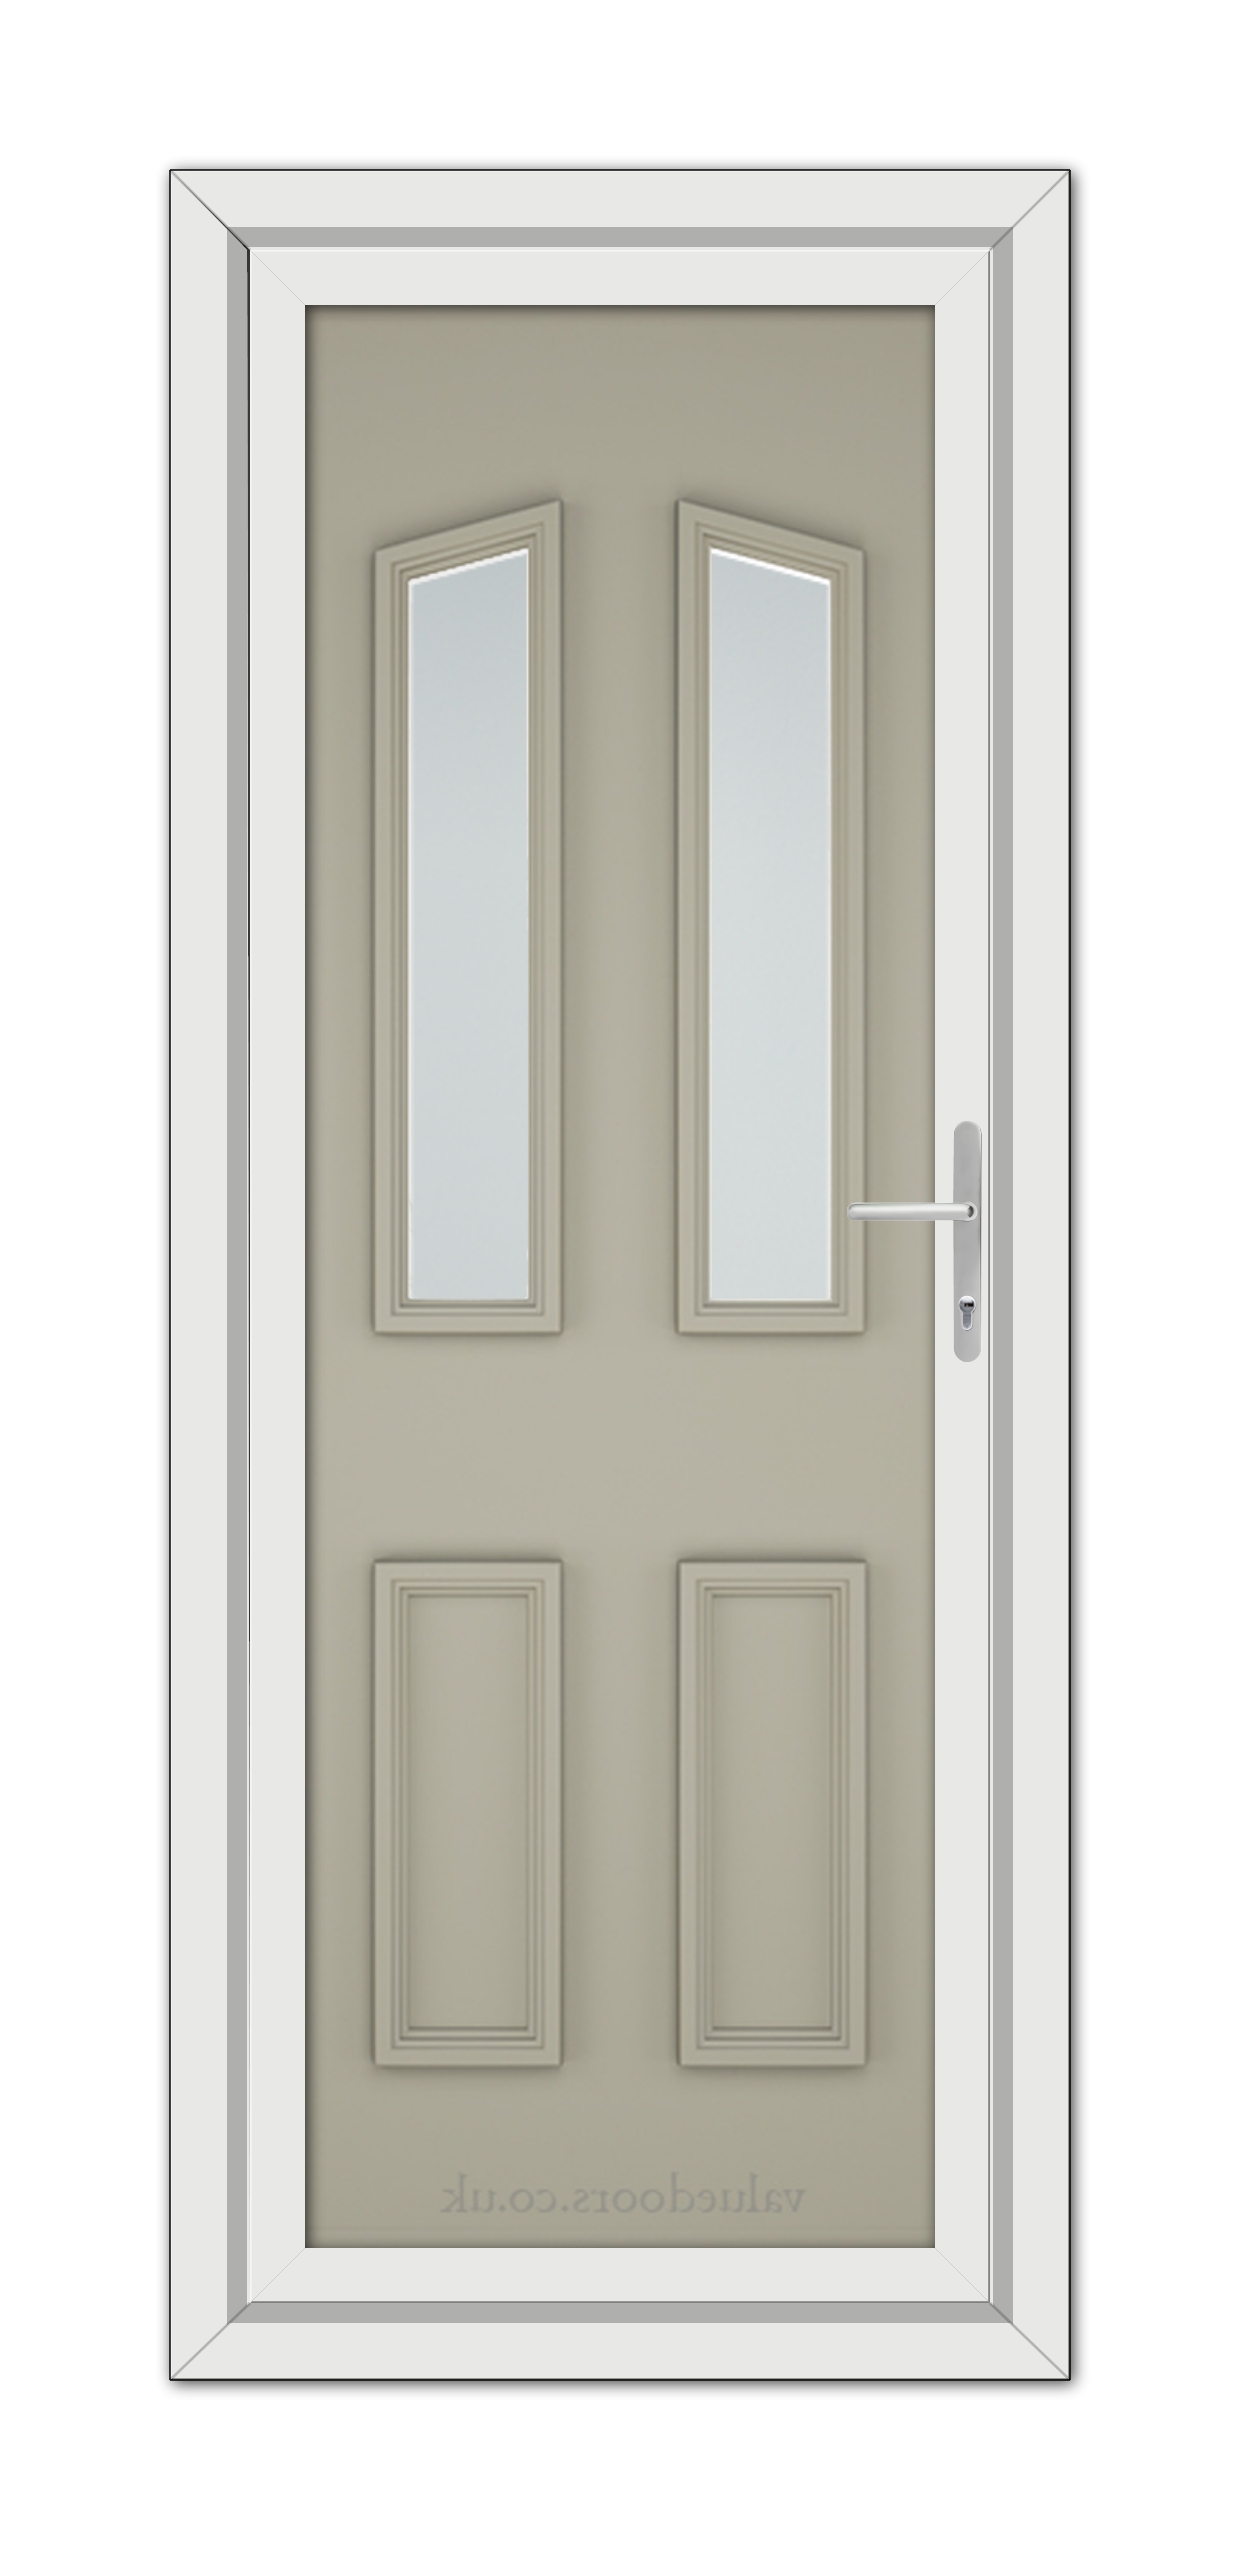 White framed Pebble Grey Kensington uPVC door with two vertical, narrow glass panels and a modern handle, isolated on a white background.